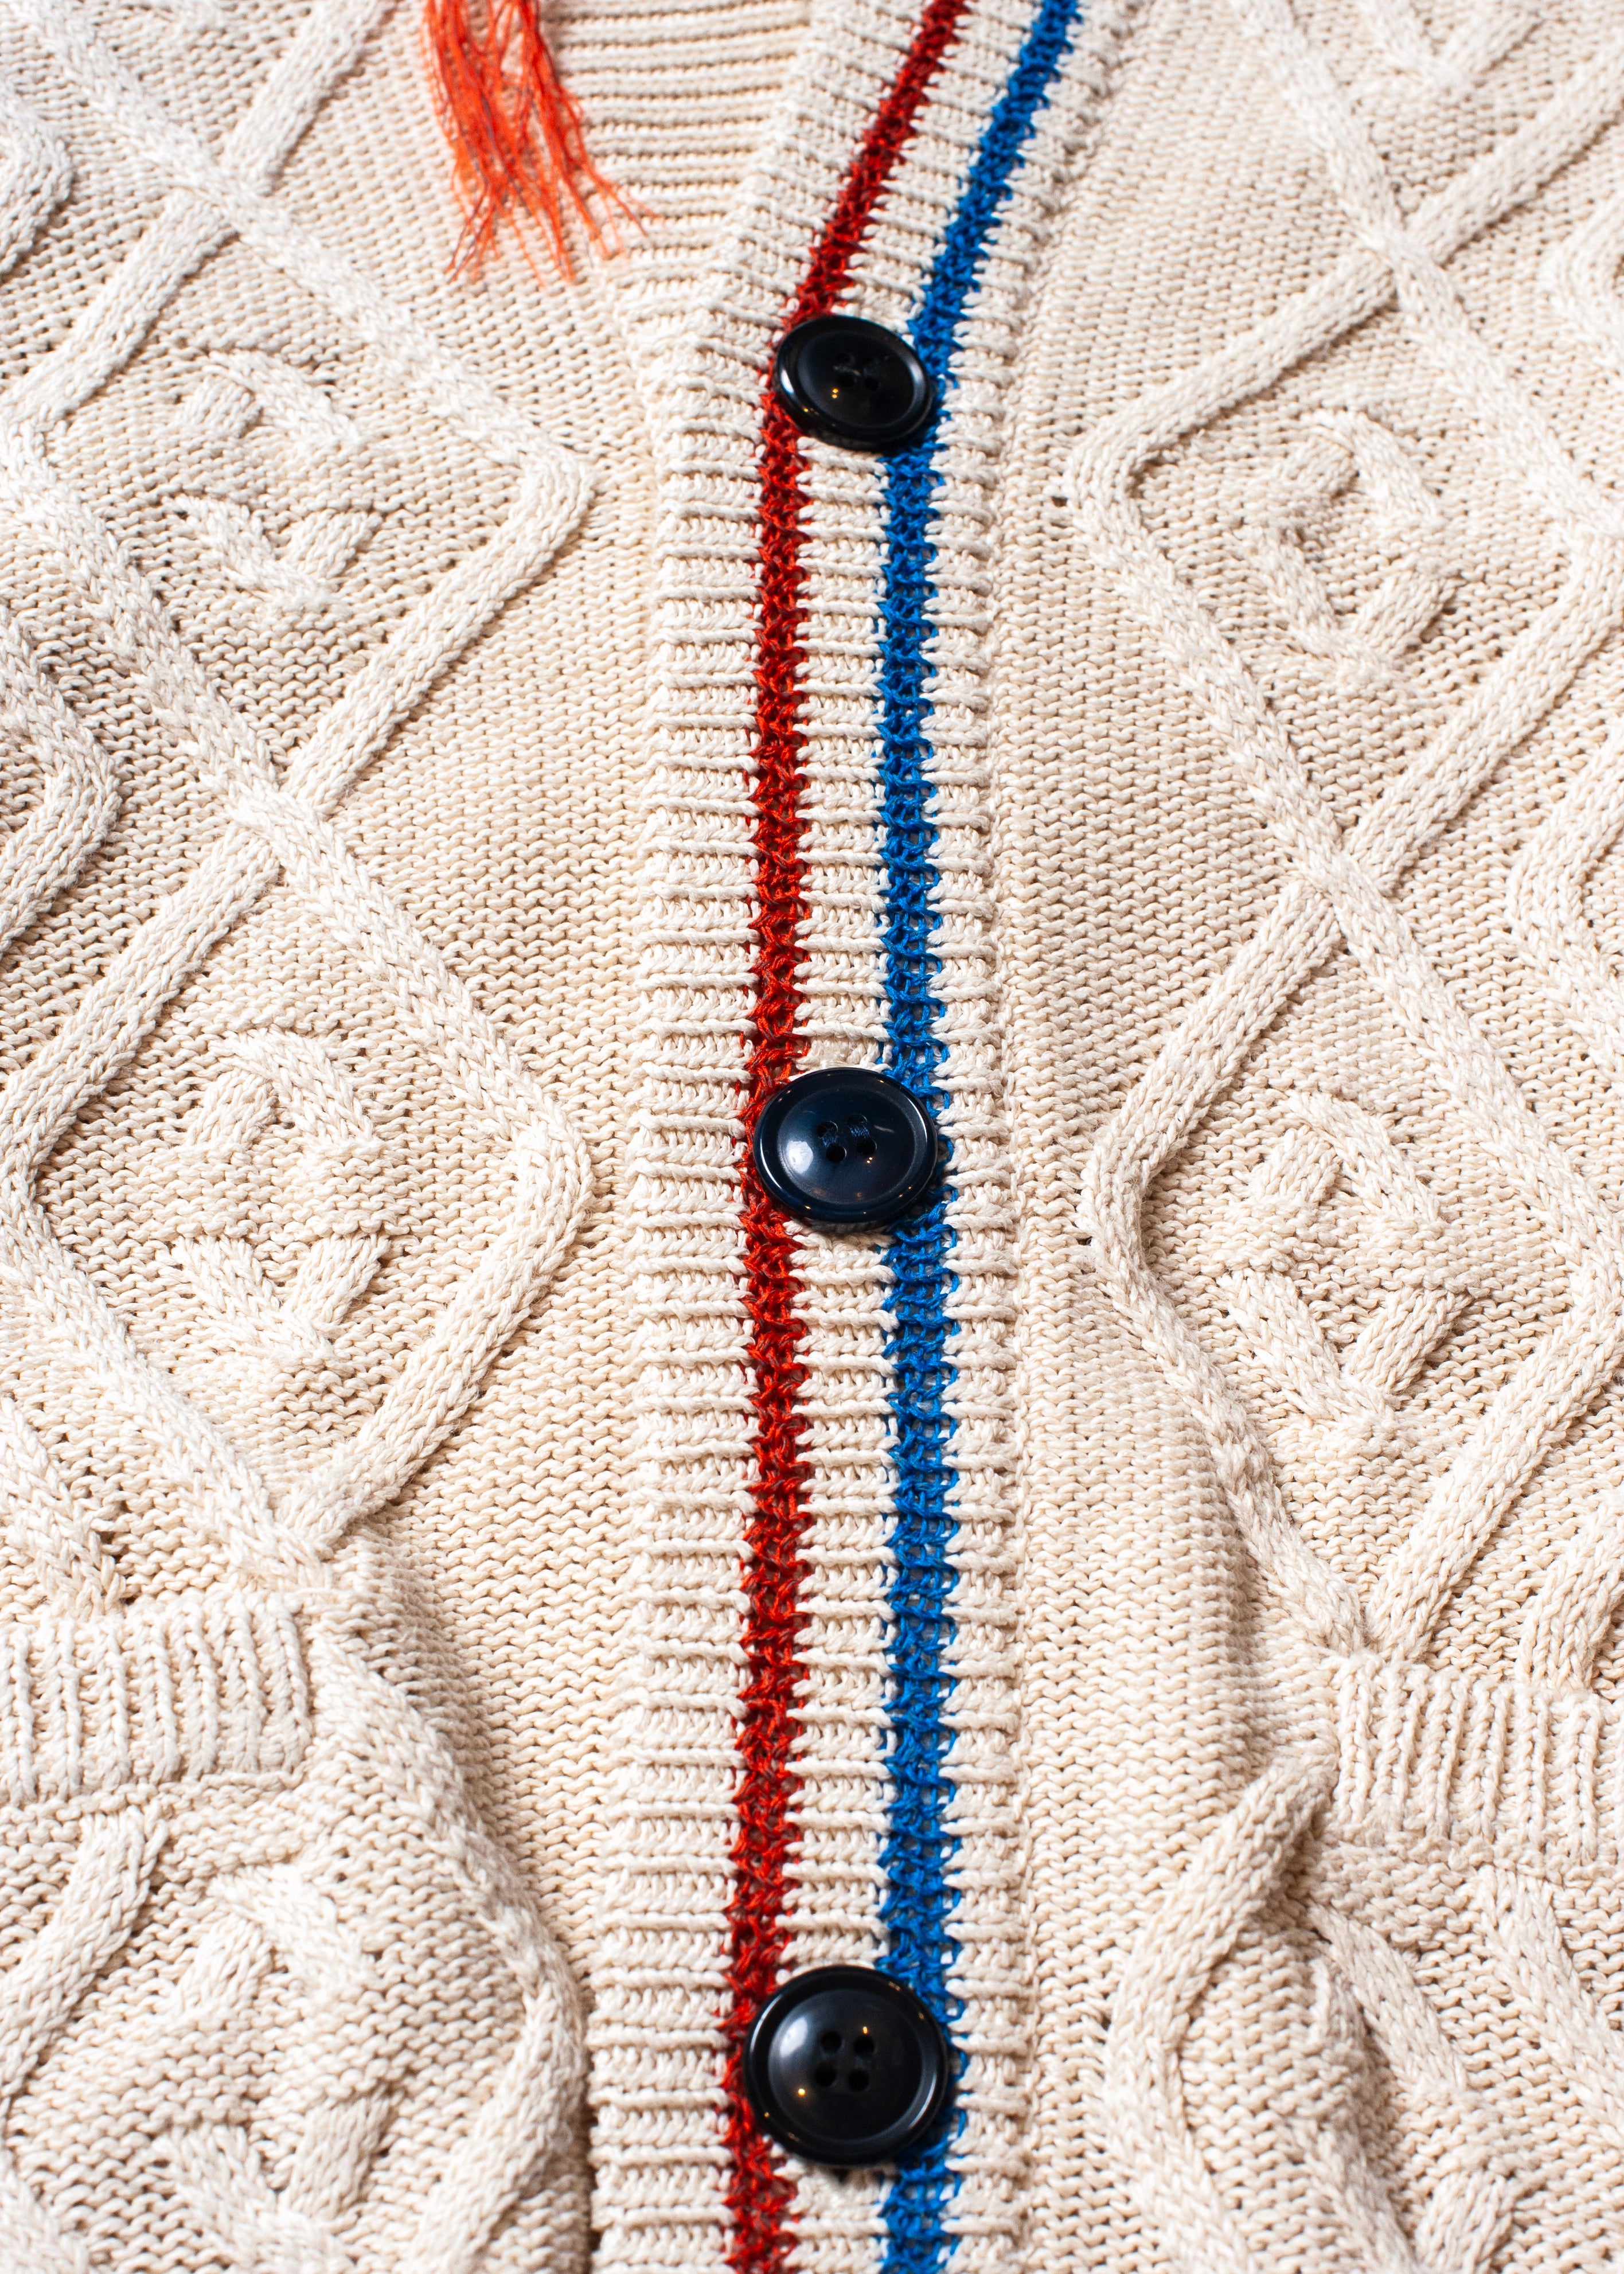 KN-SV-NNS-1002 / Japanese Paper cable knit cardigan